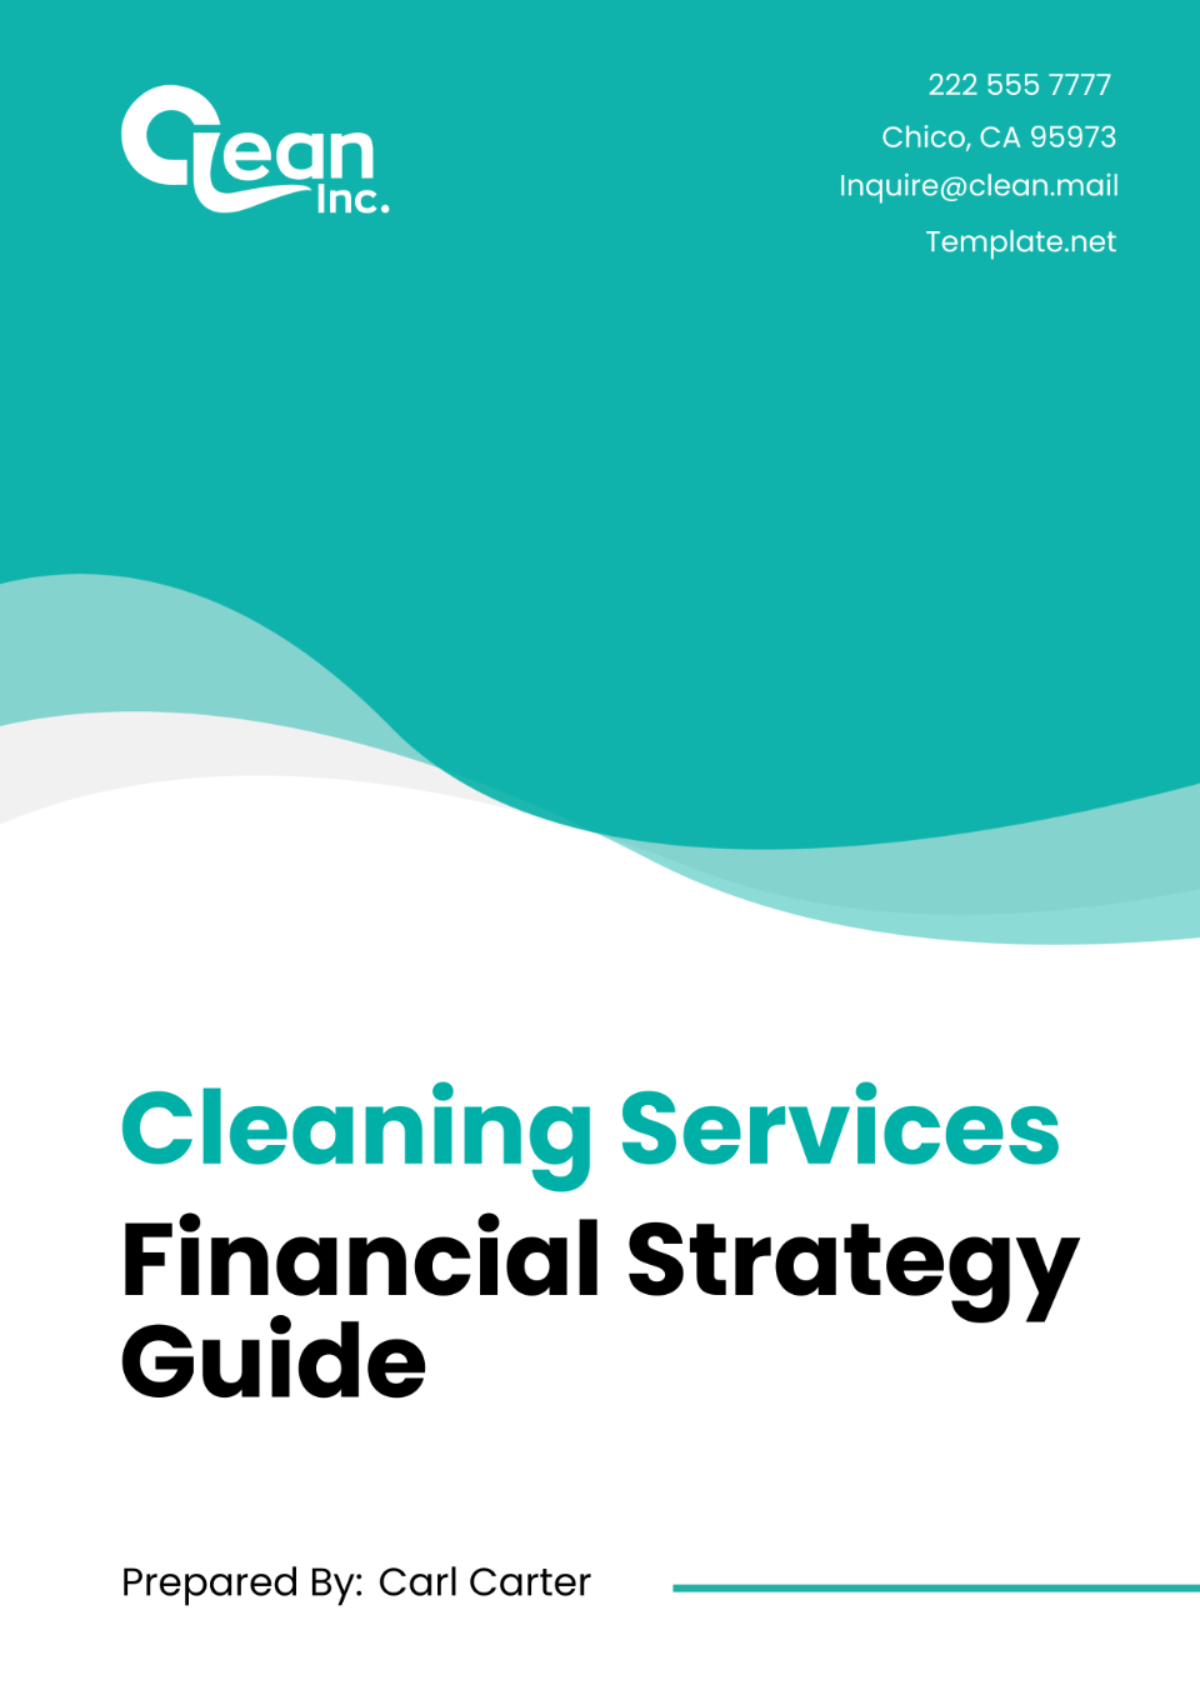 Cleaning Services Financial Strategy Guide Template